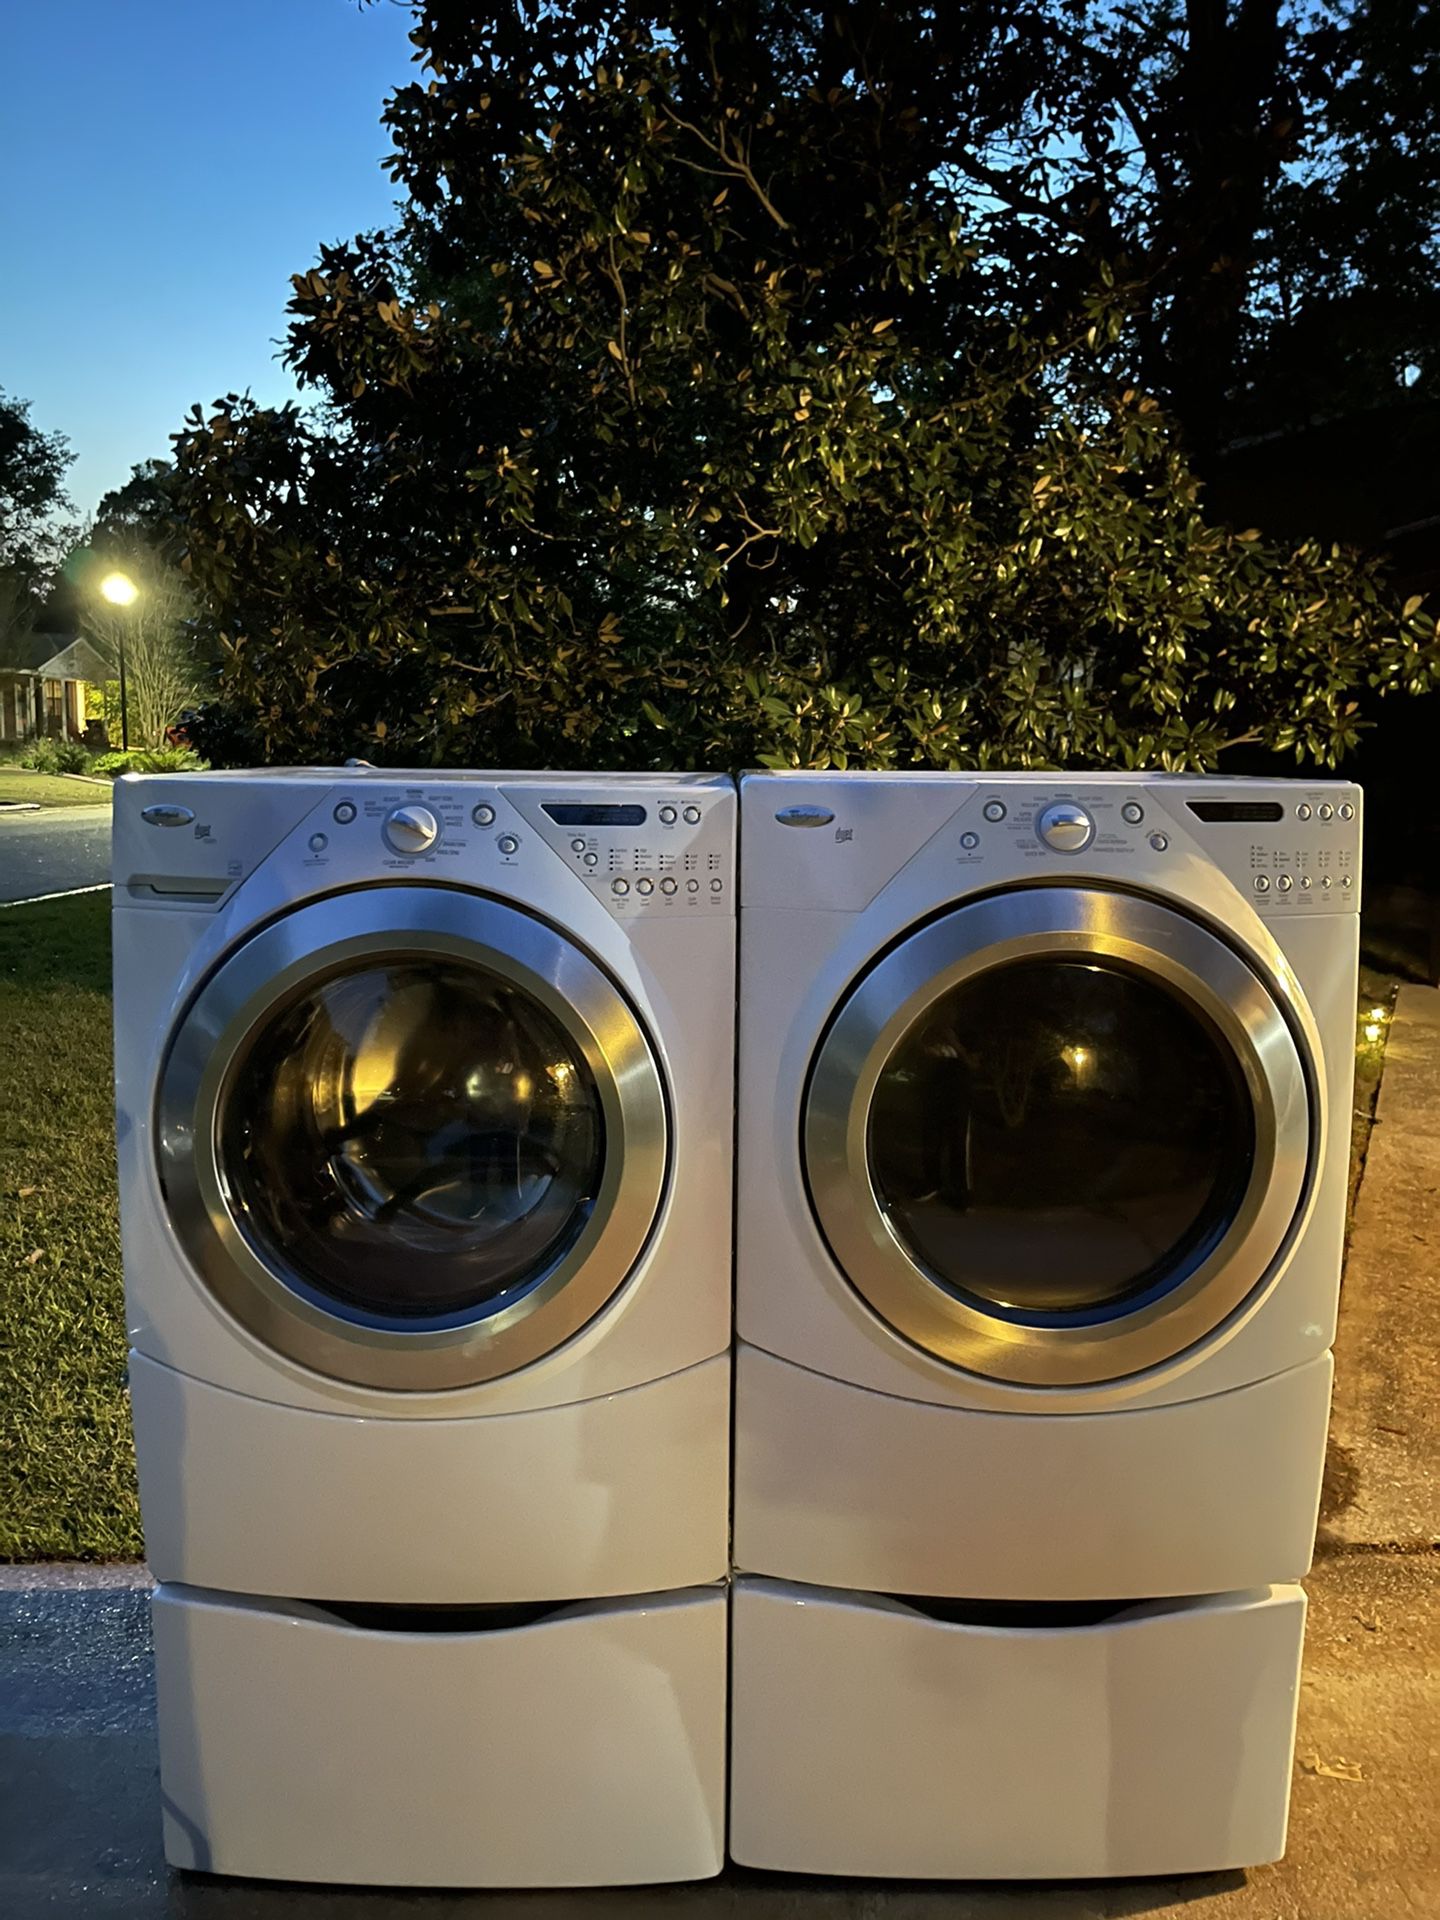 🌊Matching Whirlpool Frontloader Washer and Dryer Set Available 🌊